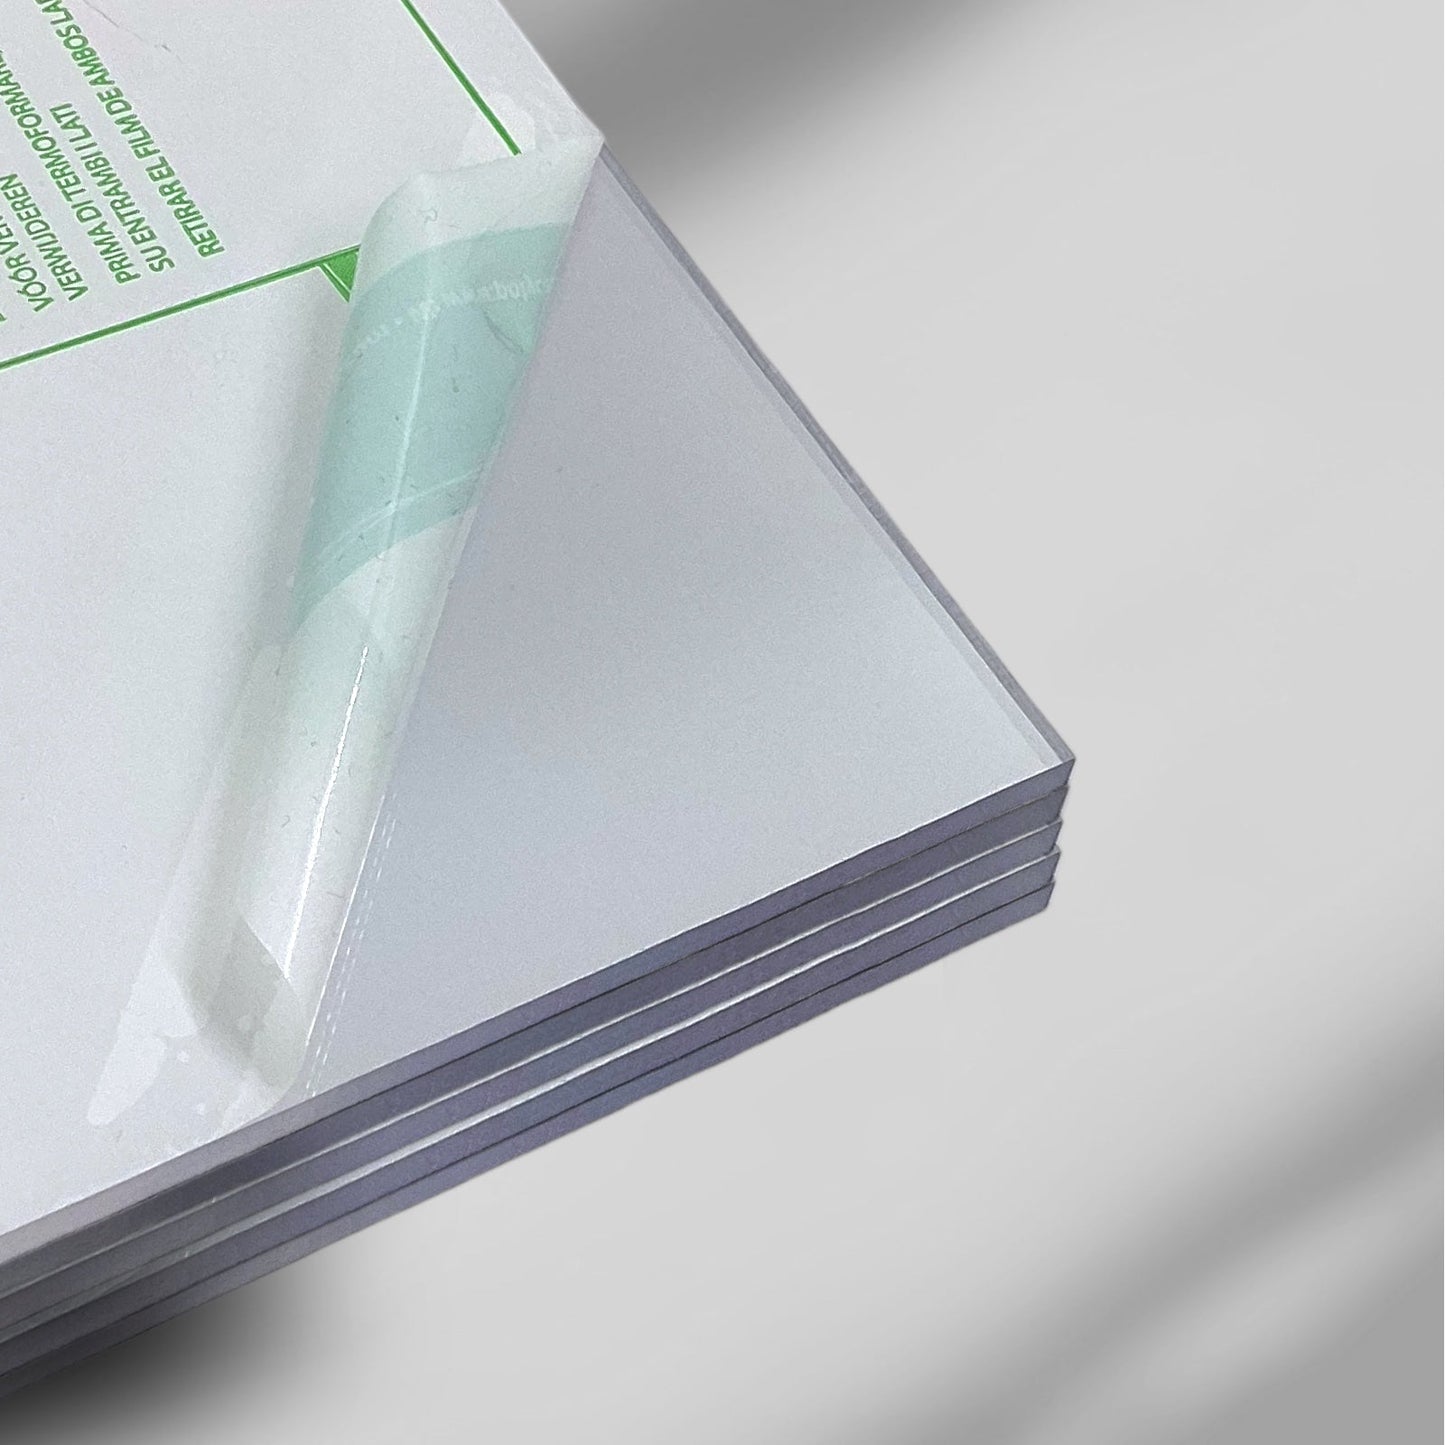 3/8" Clear Polycarbonate Sheet